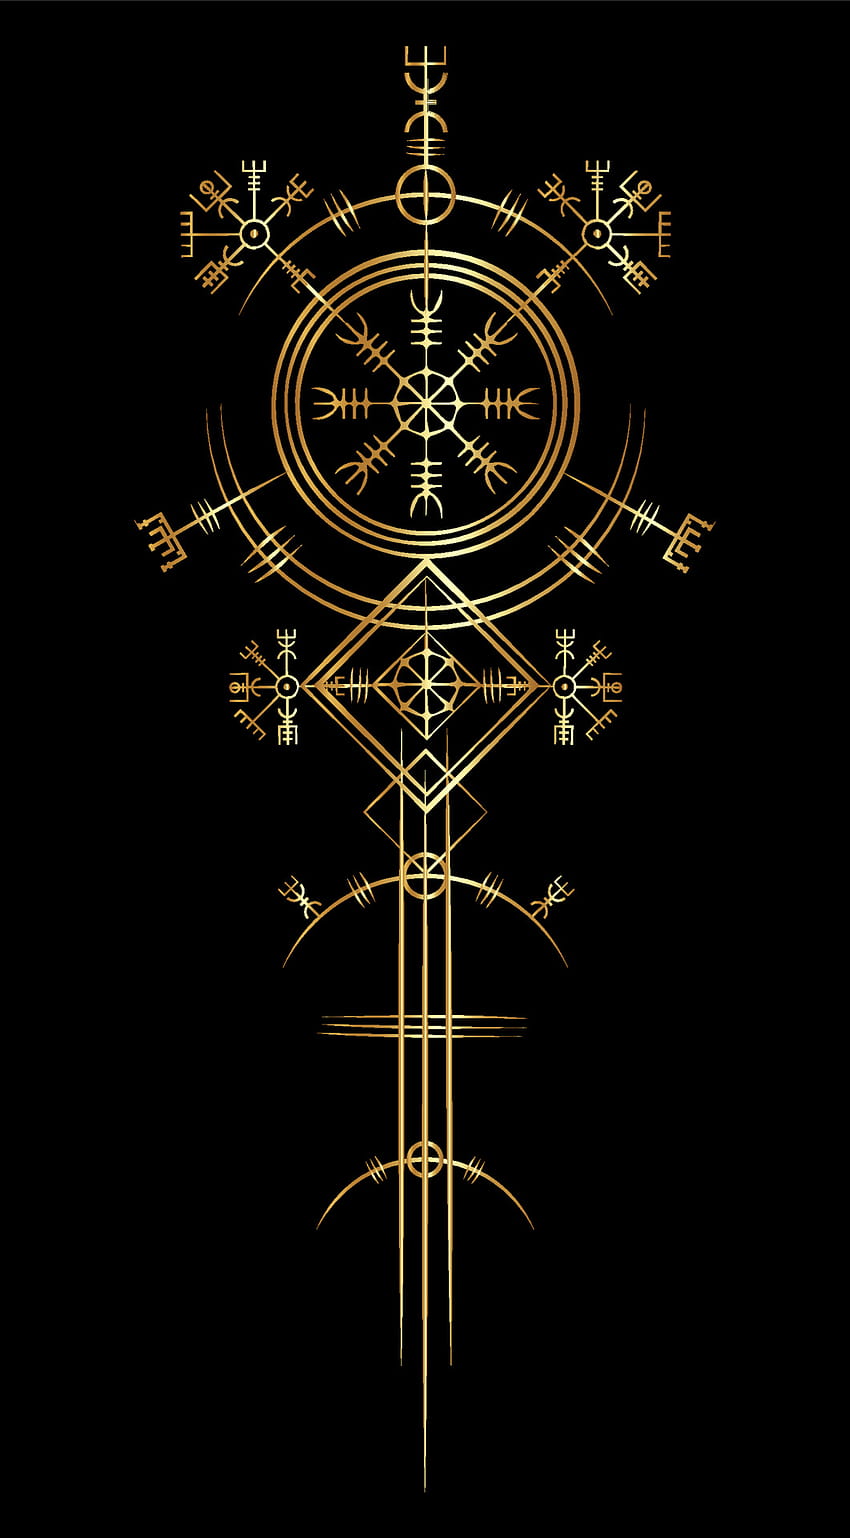 Magic ancient viking art deco, Gold Vegvisir navigation compass ancient. The Vikings used many symbols in accordance to Norse mythology, widely used in Viking society. Logo icon Wiccan esoteric sign 3727193 Vector, ancient symbols HD phone wallpaper